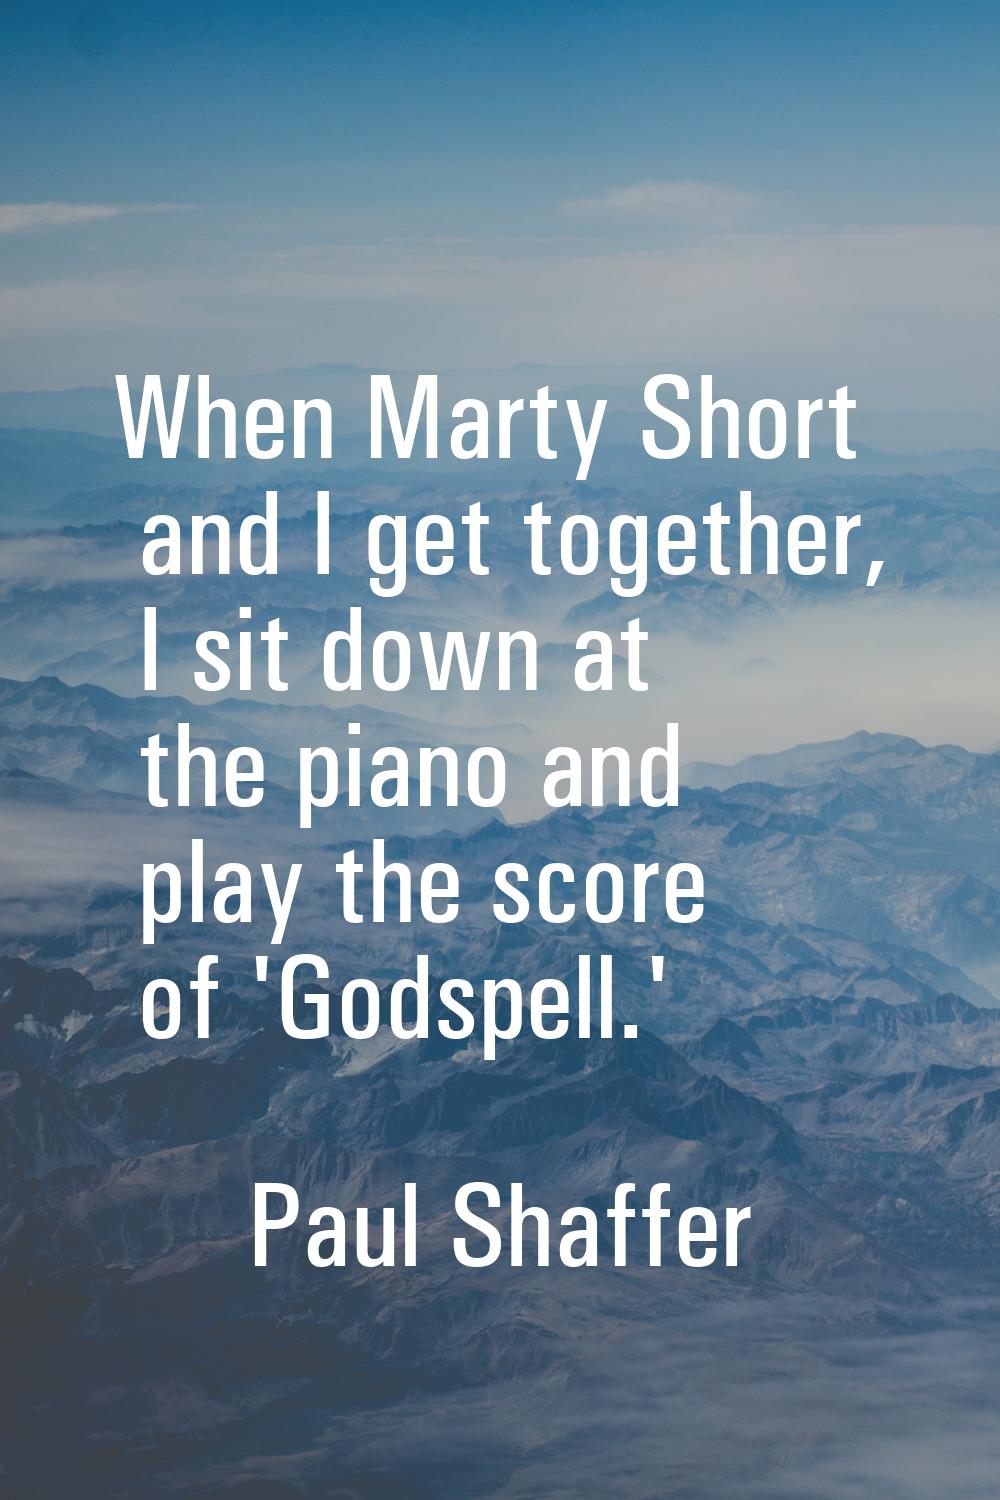 When Marty Short and I get together, I sit down at the piano and play the score of 'Godspell.'